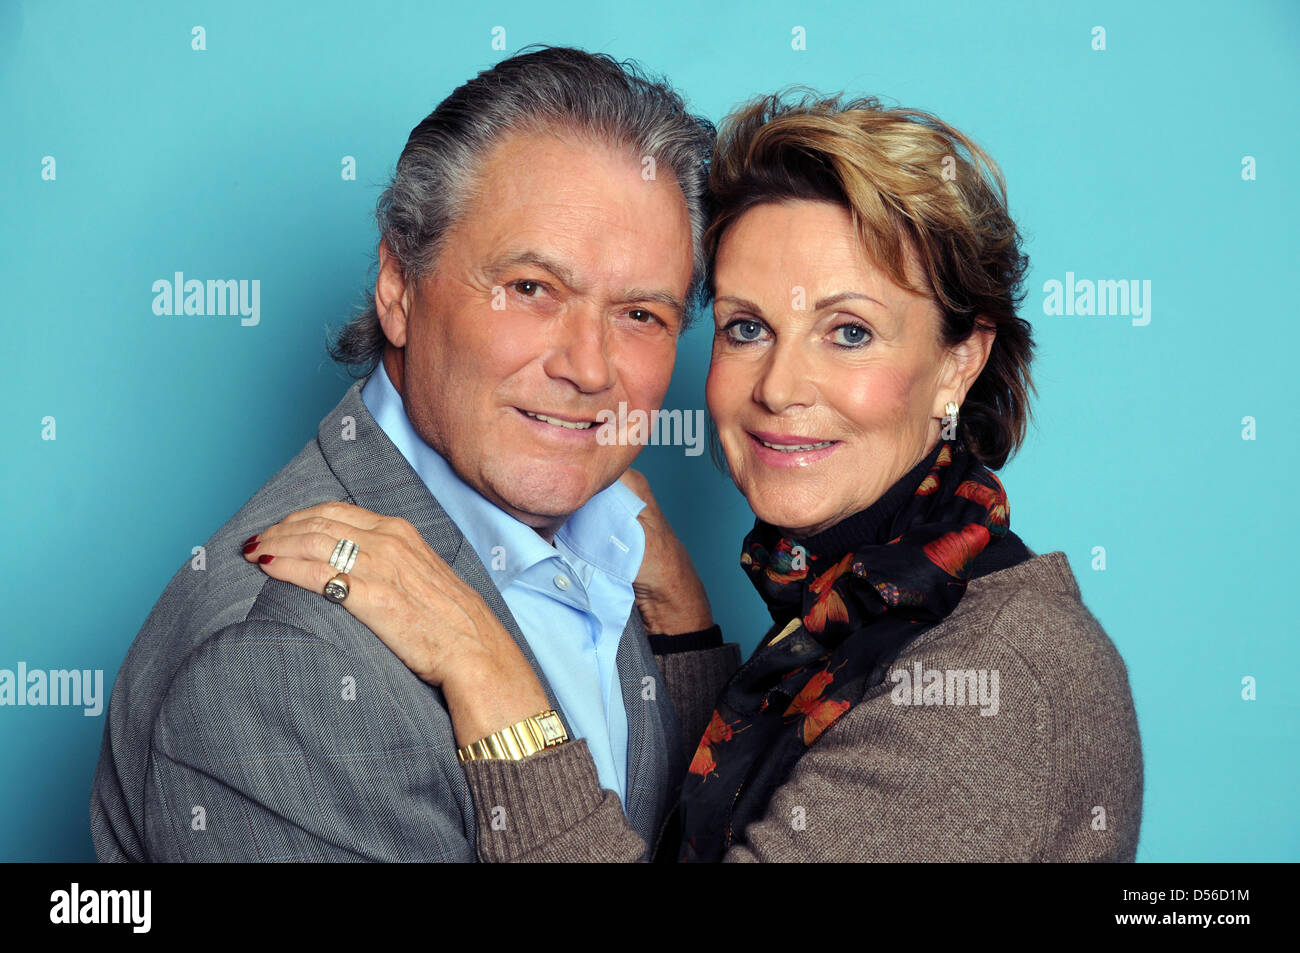 German figure skating icon and actor Hans-Juergen Baeumler (L) and his wife Marina (R) pose during a photo call in Cologne, Germany, 12 November 2010. Photo: Horst Ossinger Stock Photo